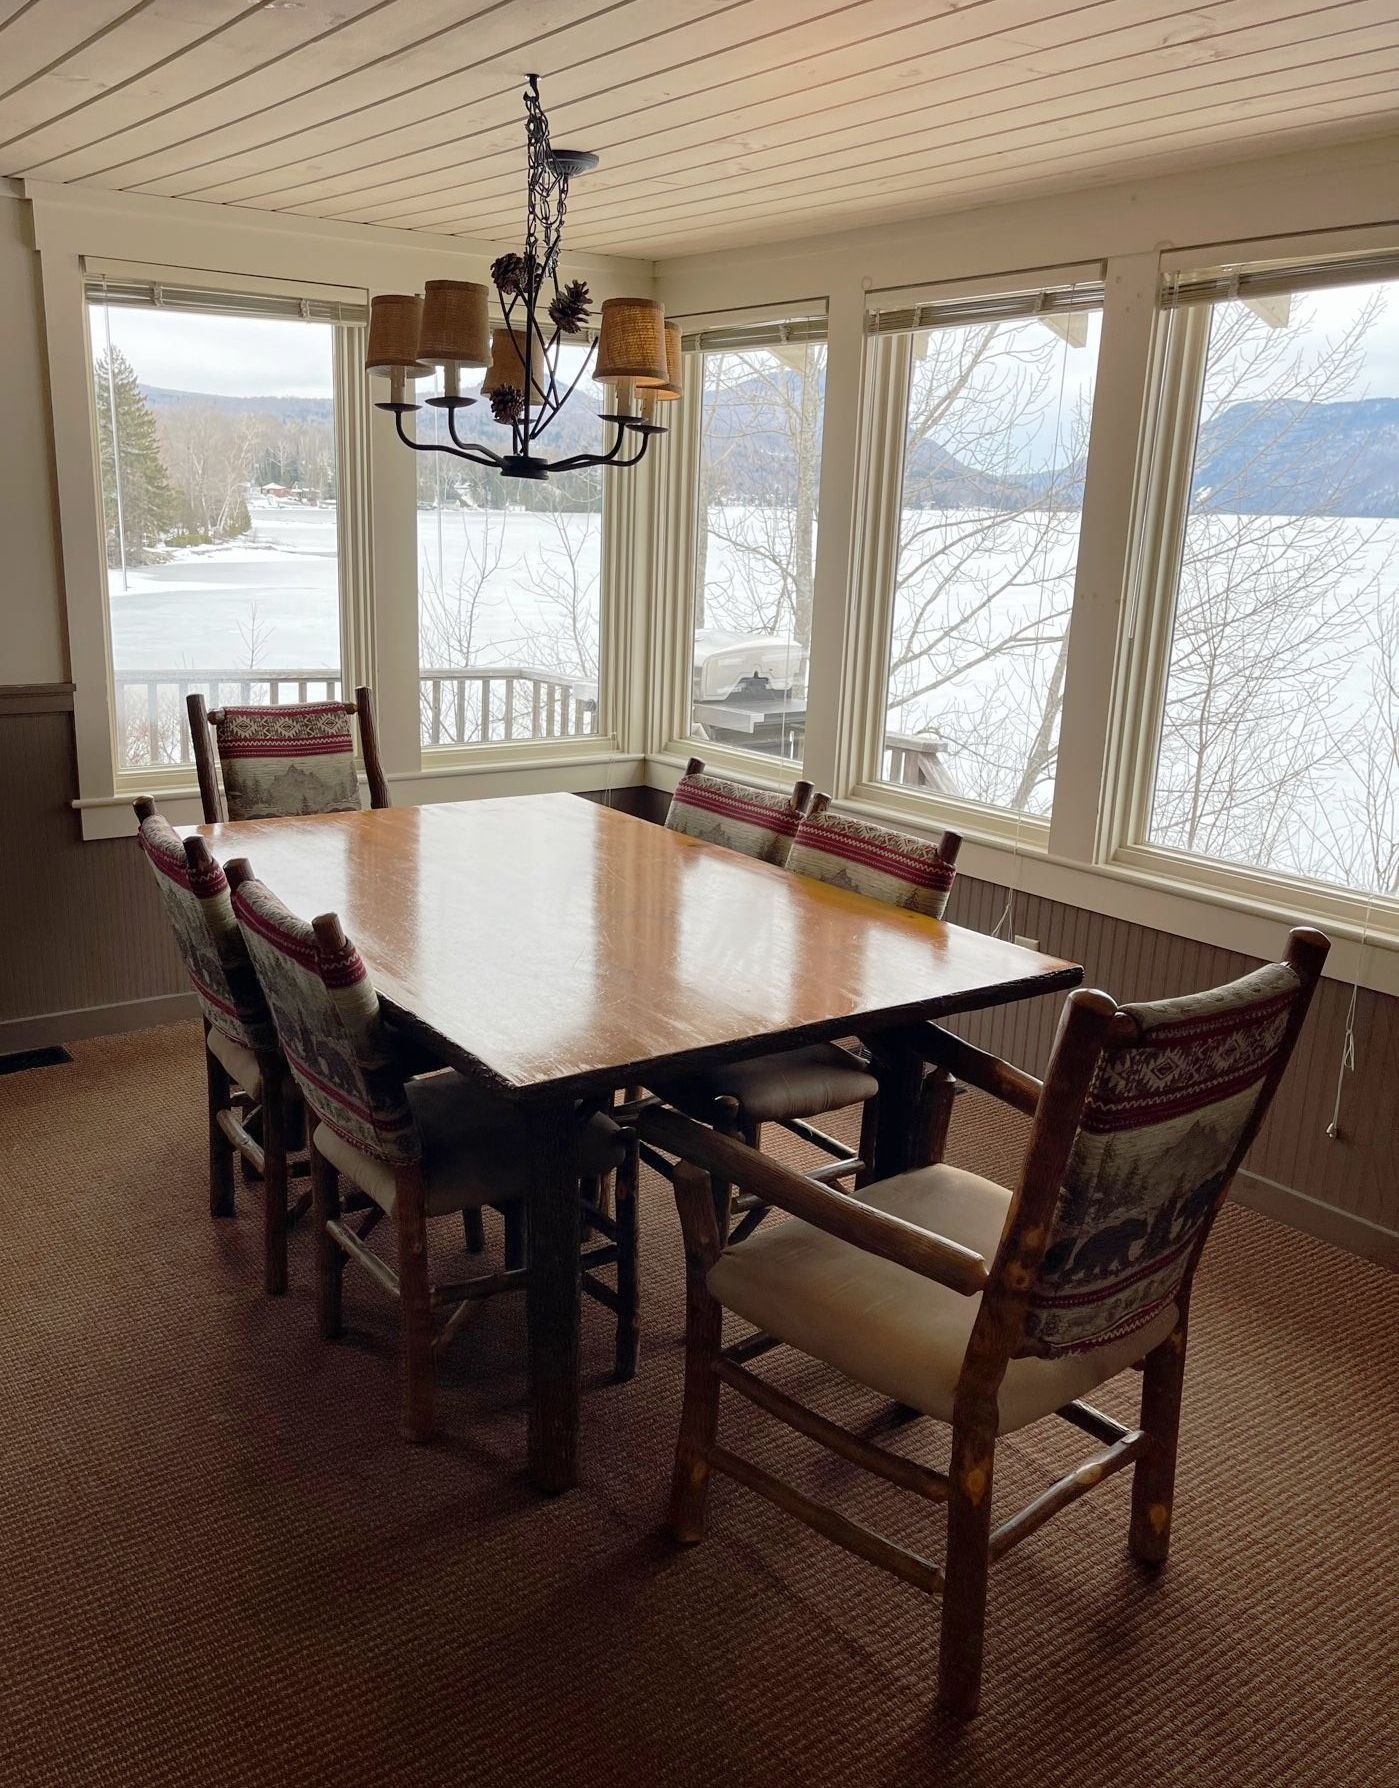 The Robert Frost Cottage Livingroom on Lake Willoughby in Vermont